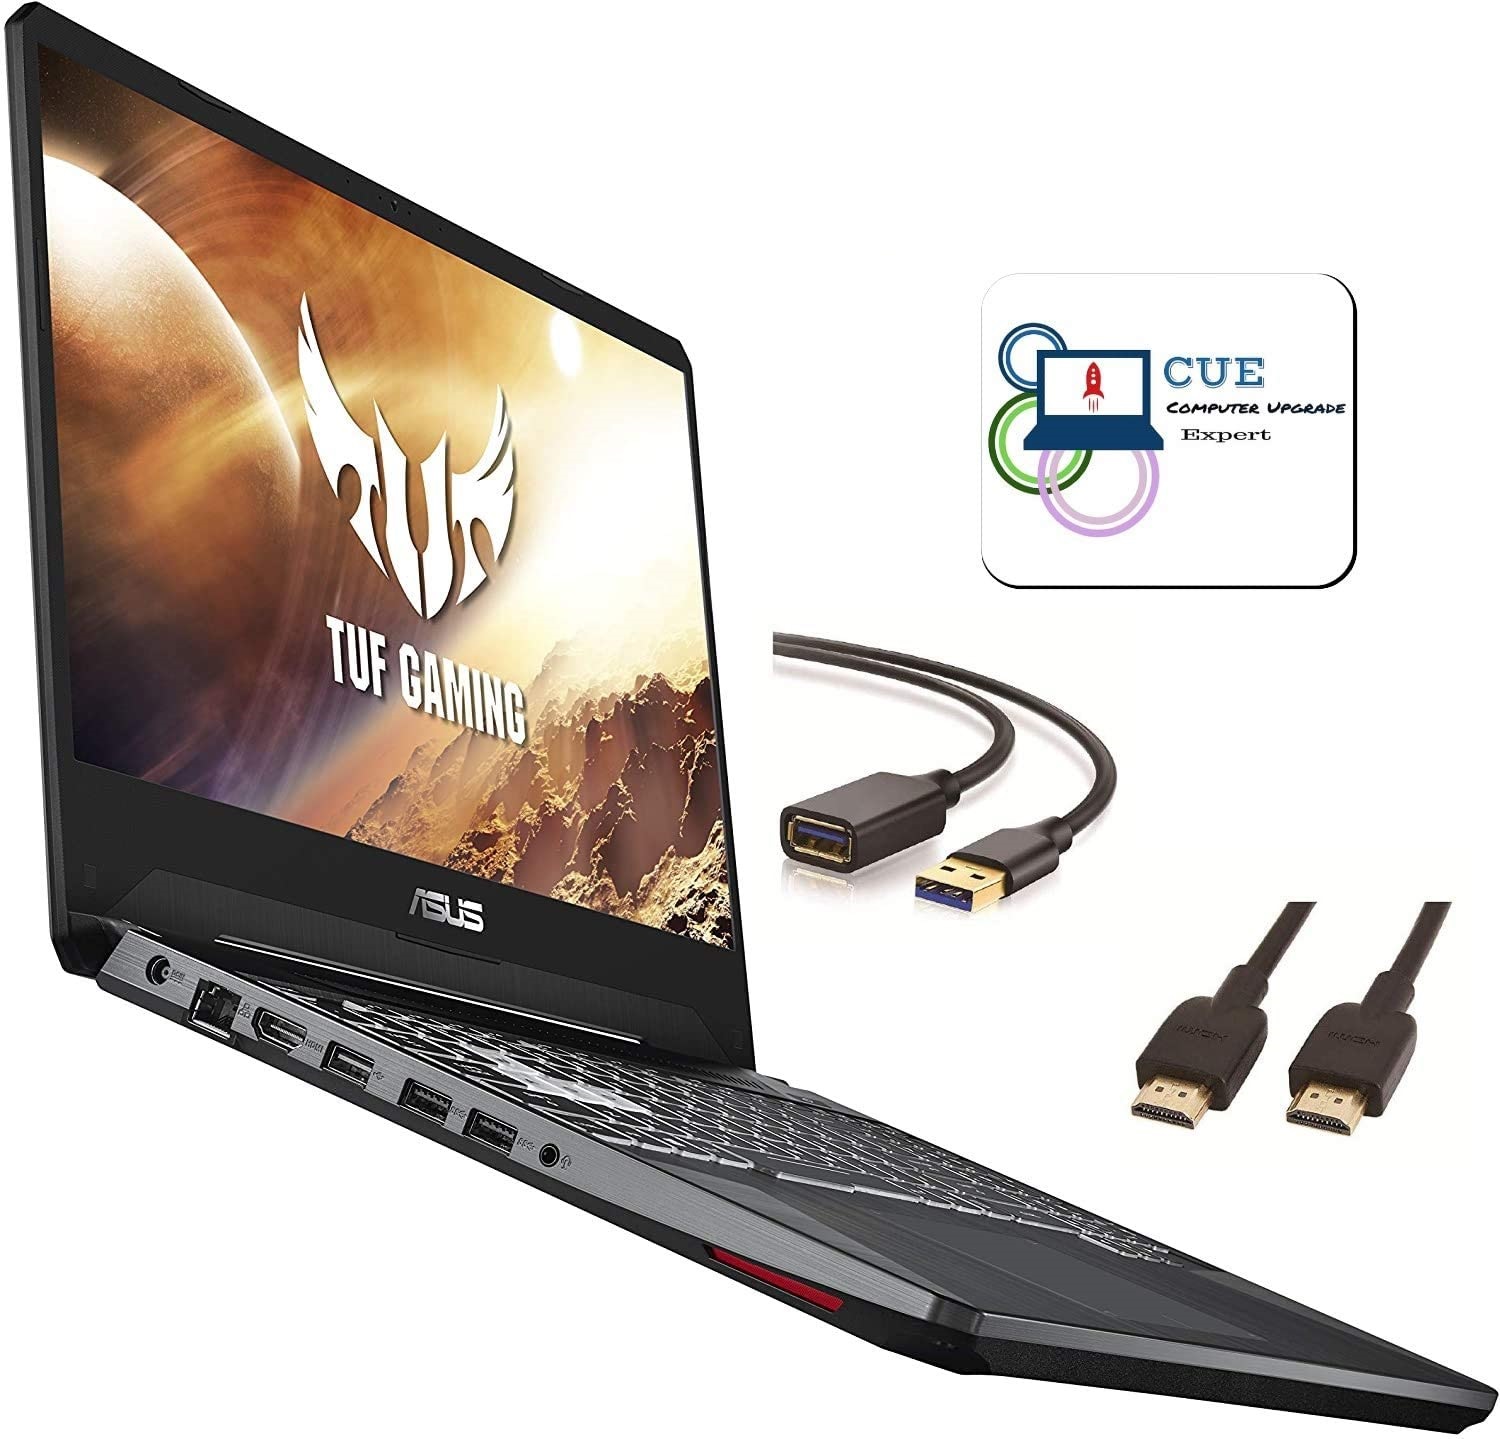 Asus Tuf Gaming Fx504 Ryzen 5 3550h Gtx 1650 15 6 Full Hd 19 X 1080 Ips 256gb Ssd 8gb Ddr4 Windows 10 Home Usb Extension Cable Hdmi Cable Mouse Pad Laptopmedia Usa